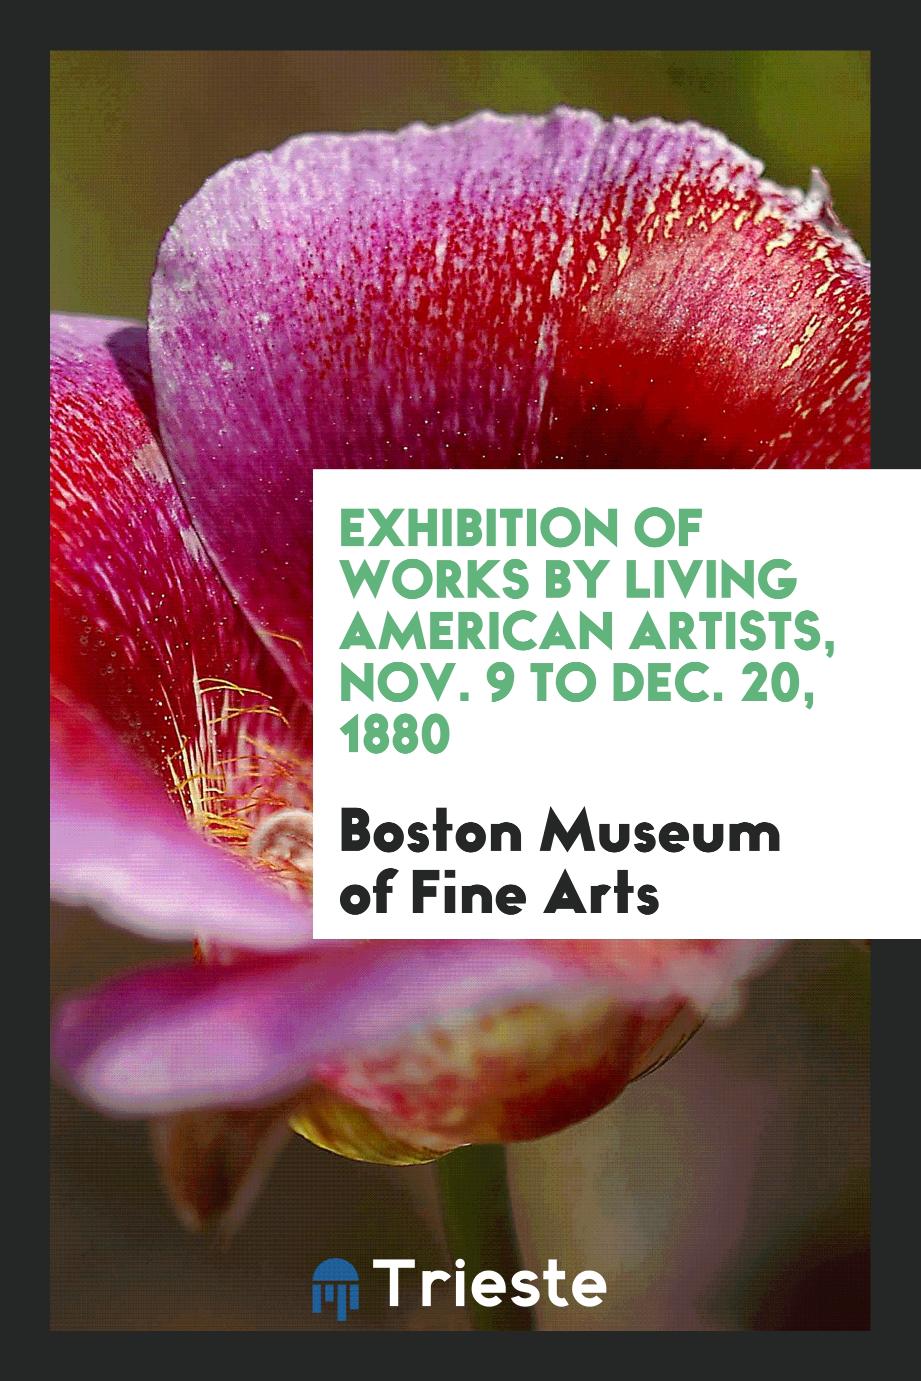 Exhibition of Works by Living American Artists, Nov. 9 to Dec. 20, 1880